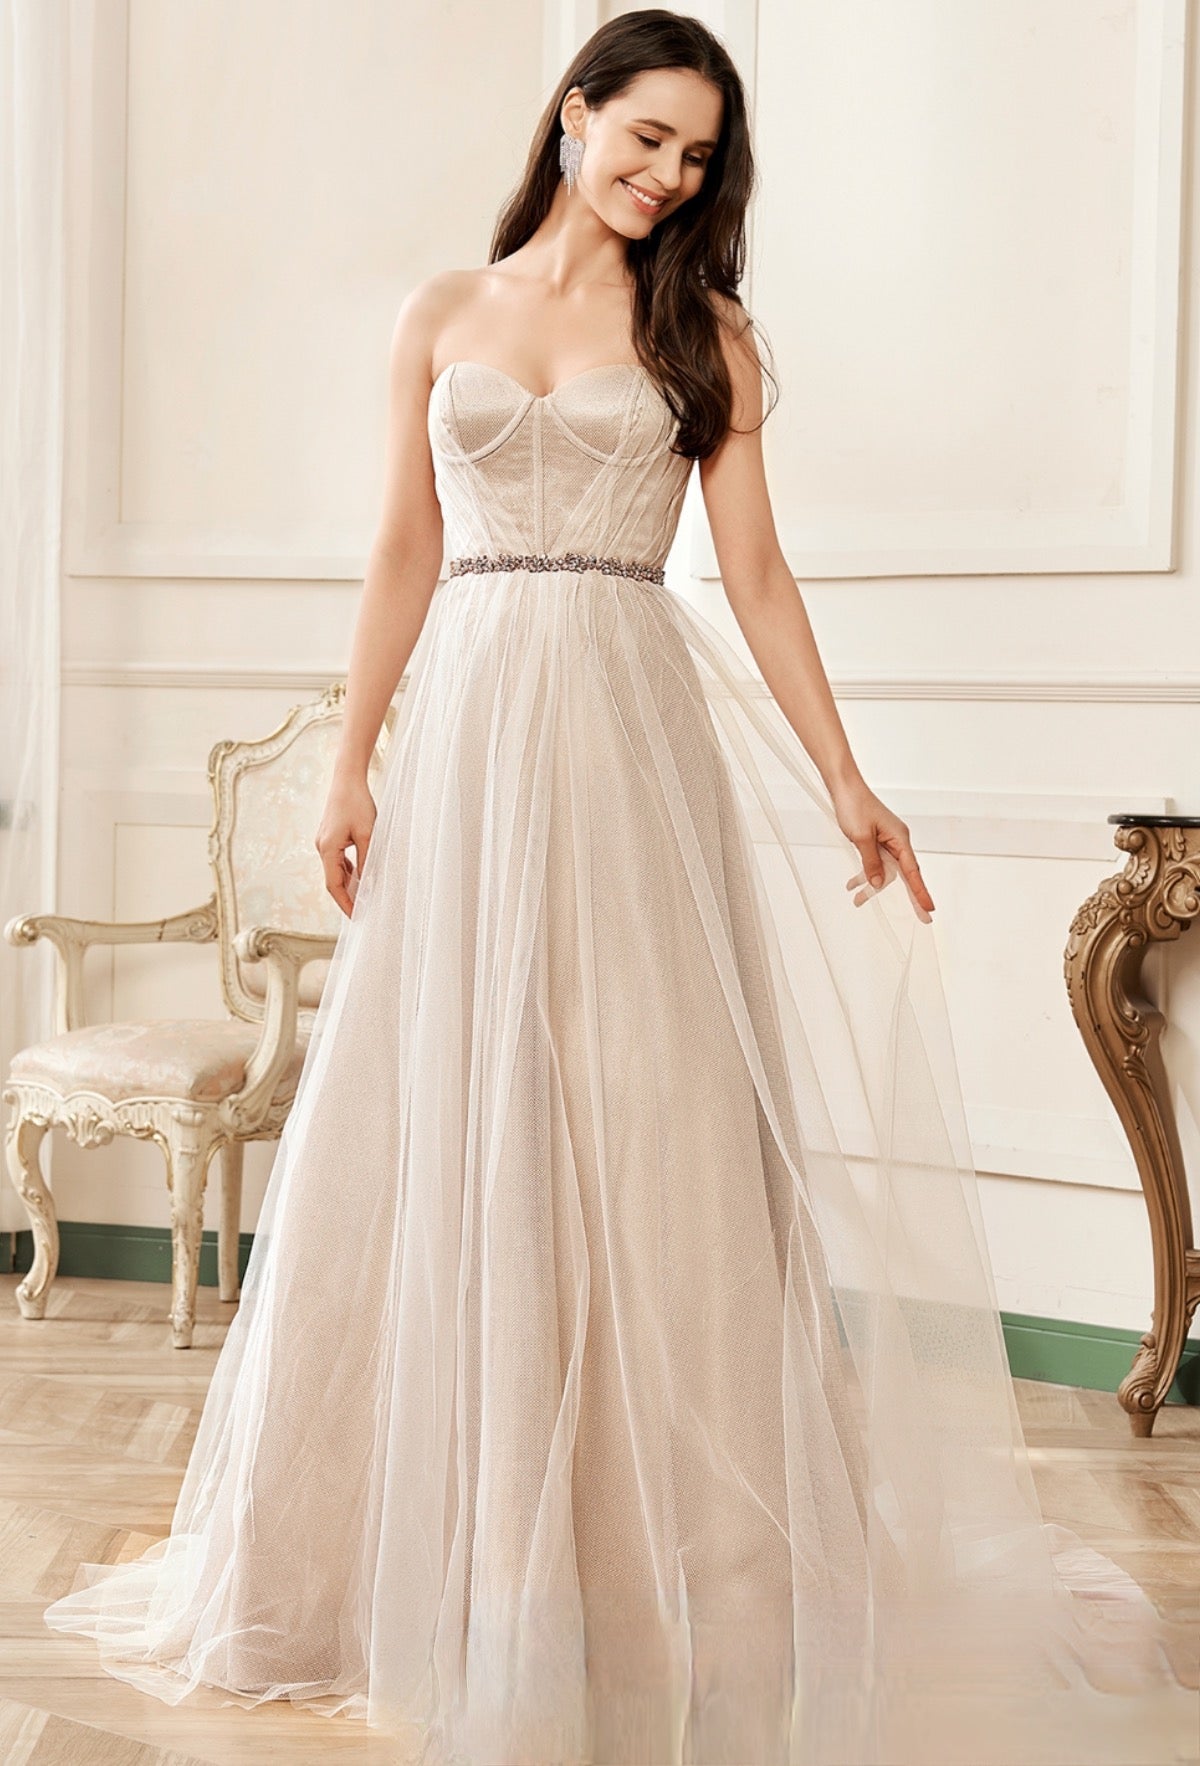 Shimmer Pink Sweetheart Corset Bridal Gown in Sparkle Tulle – TulleLux  Bridal Crowns & Accessories